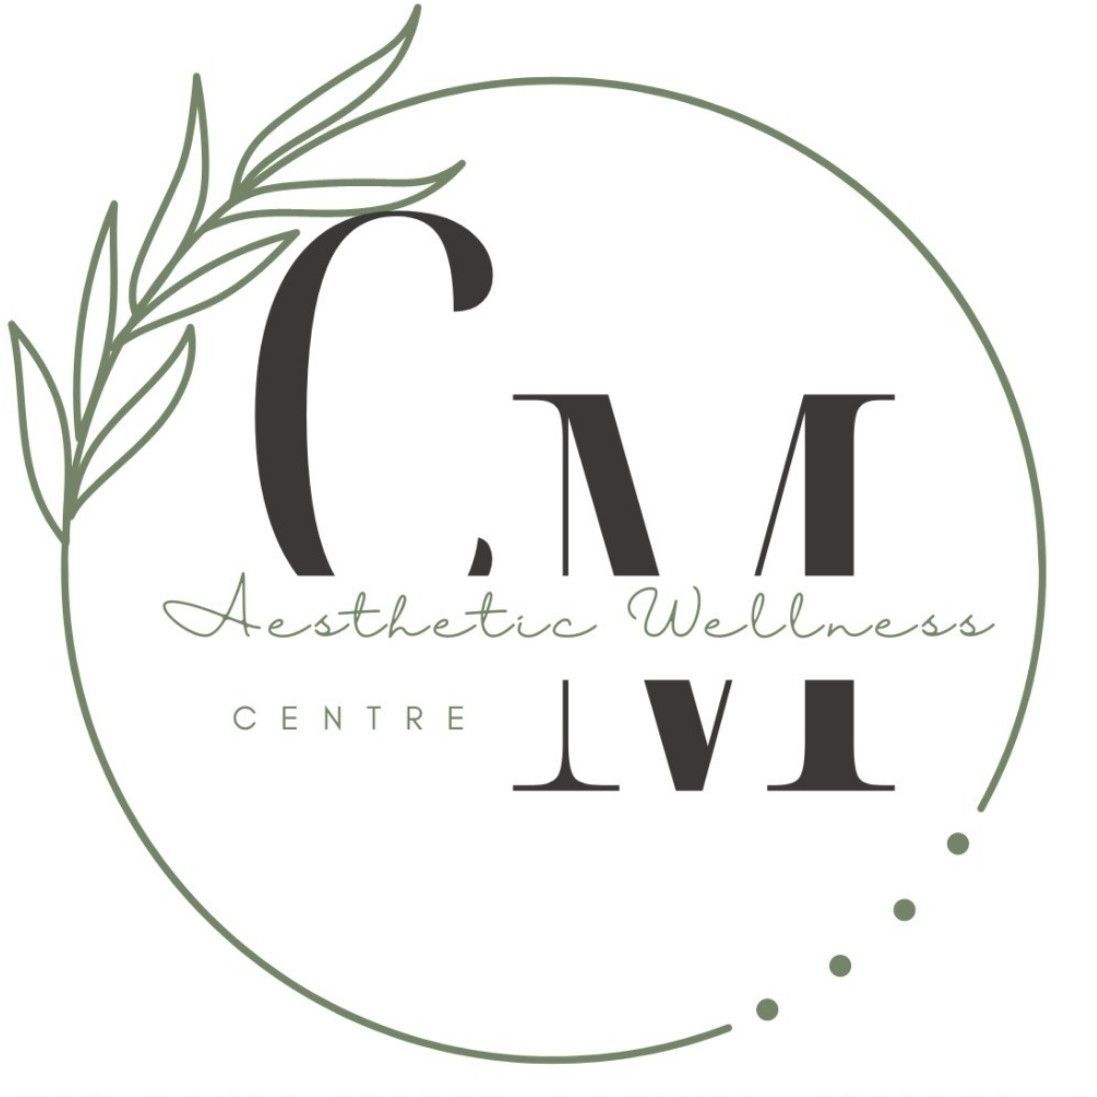 CM Aesthetic Wellness Centre, 10 Newhouse St, 1559, Springs